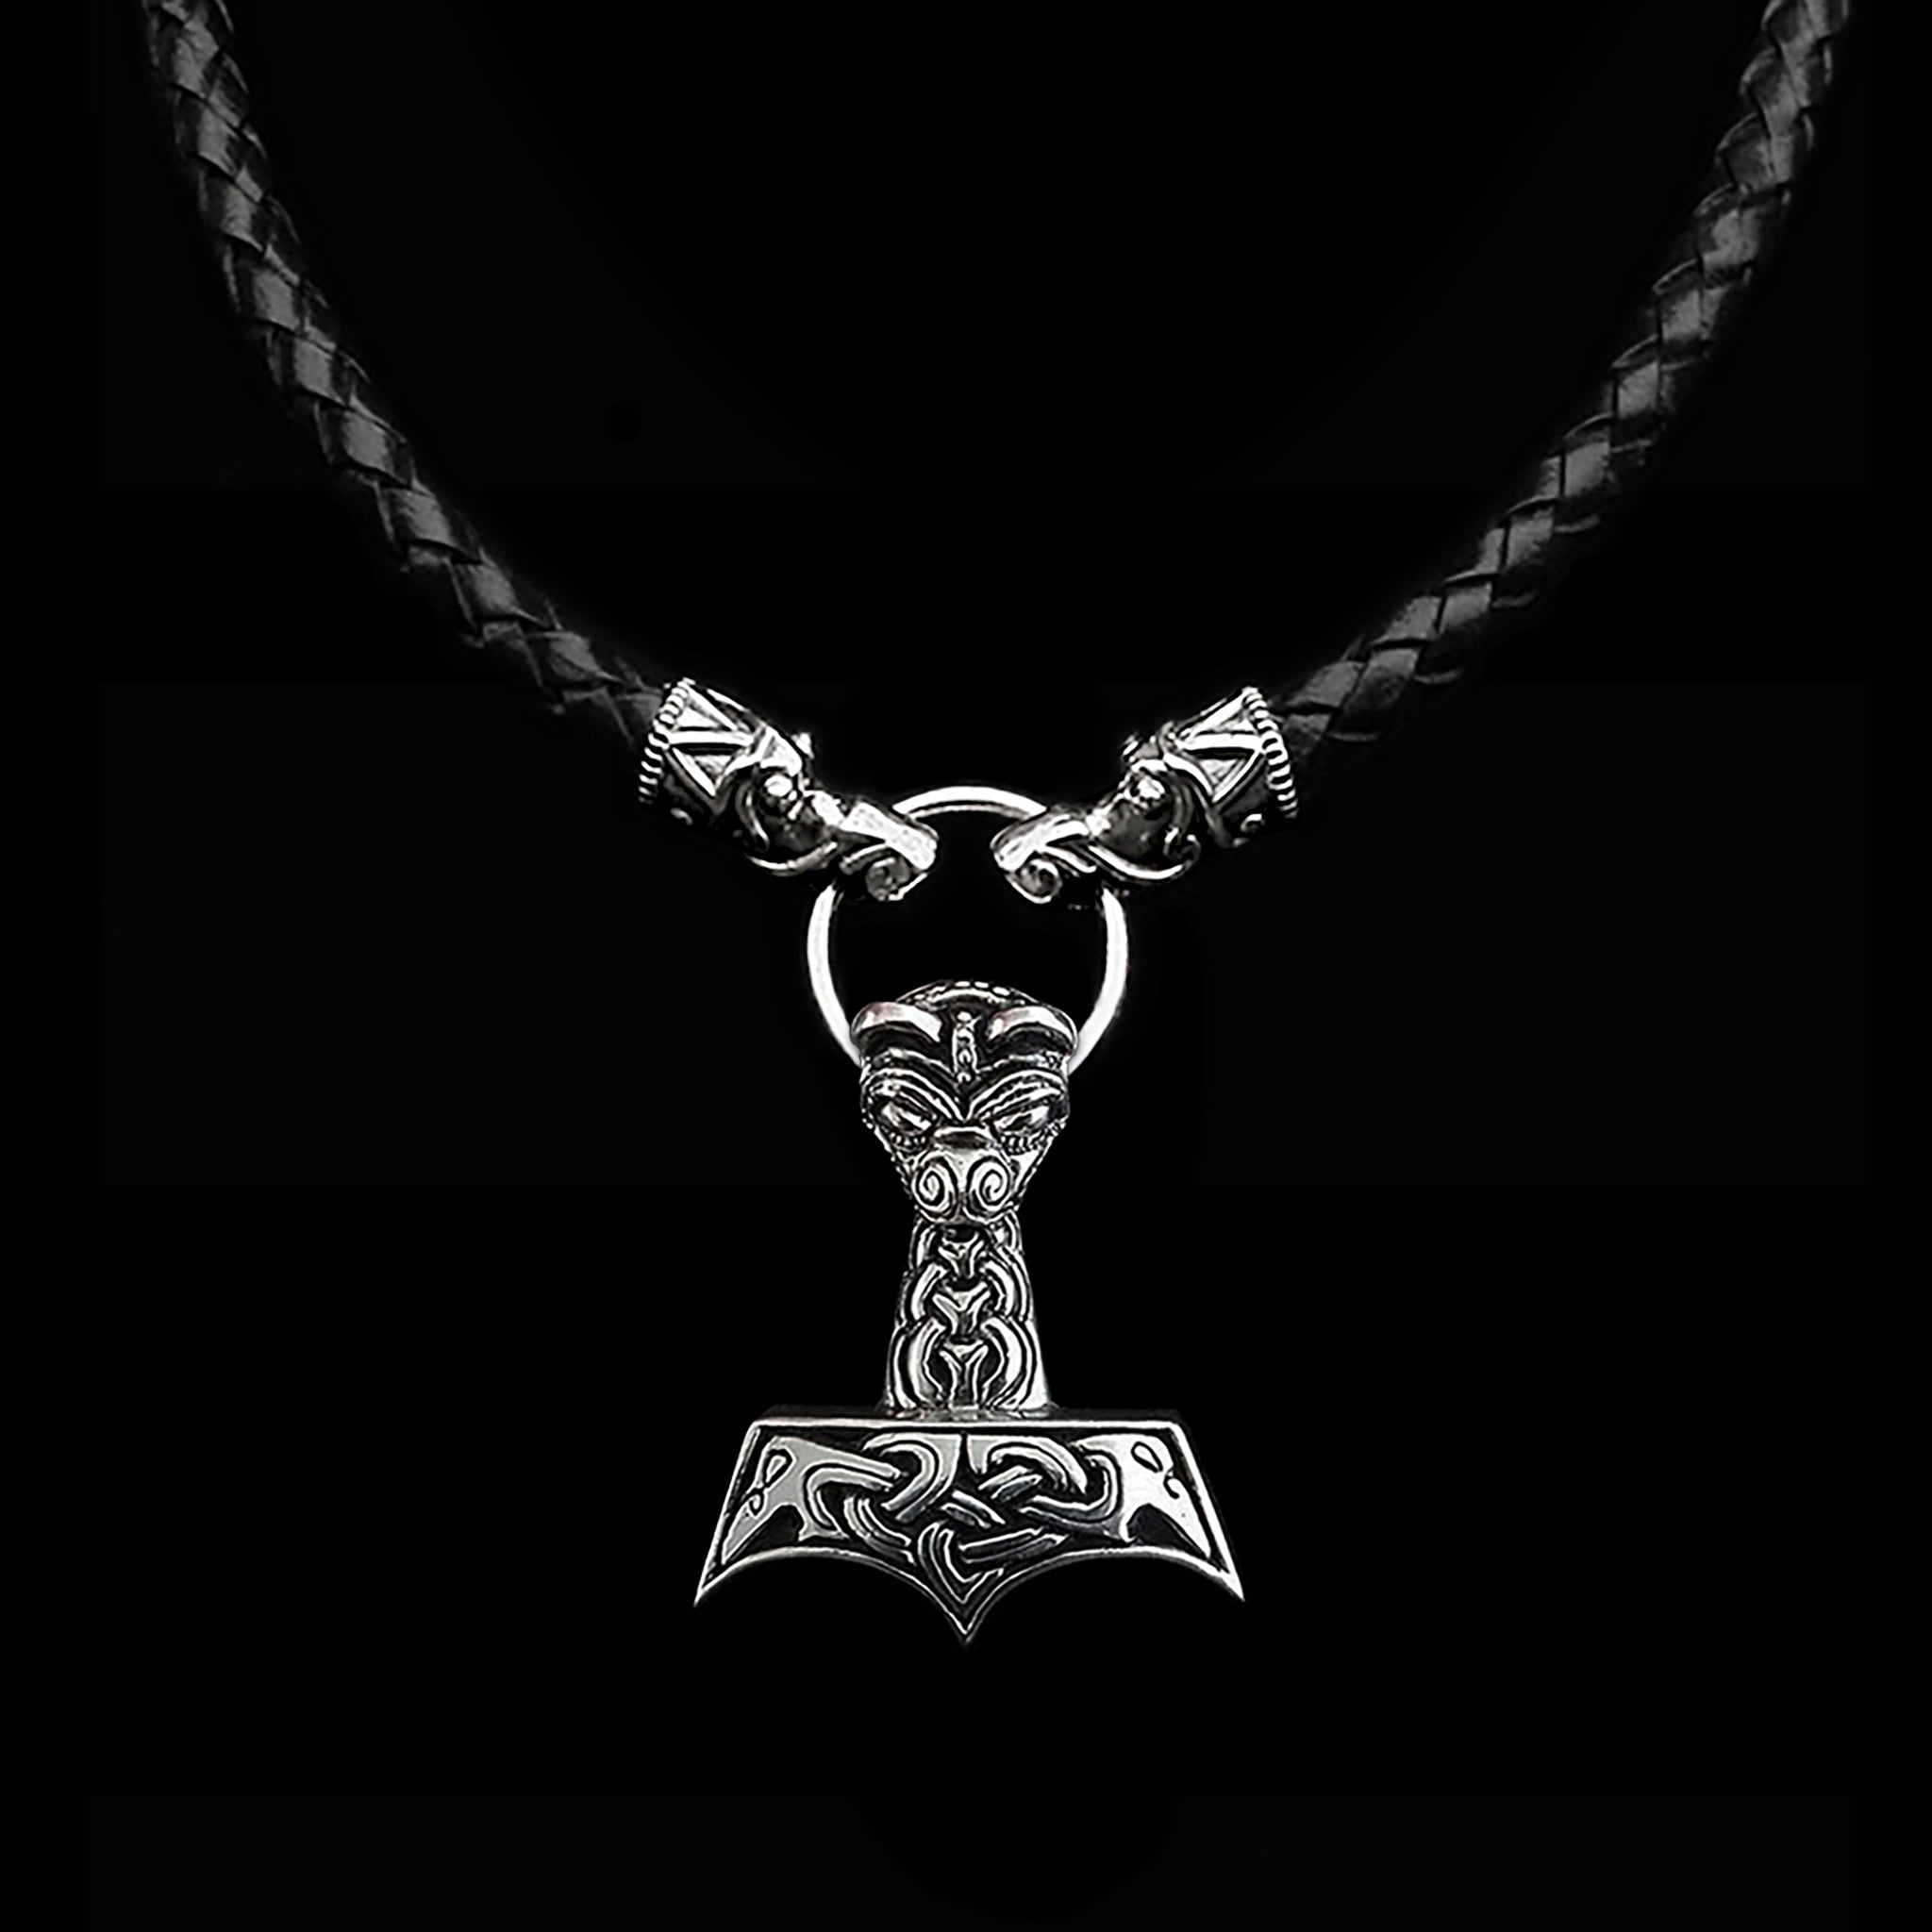 Customisable 8mm Thick Braided Leather Thors Hammer Necklace with Silver Gotland Dragon Heads, Split Ring and AD3 Large & Ferocious Thor's Hammer